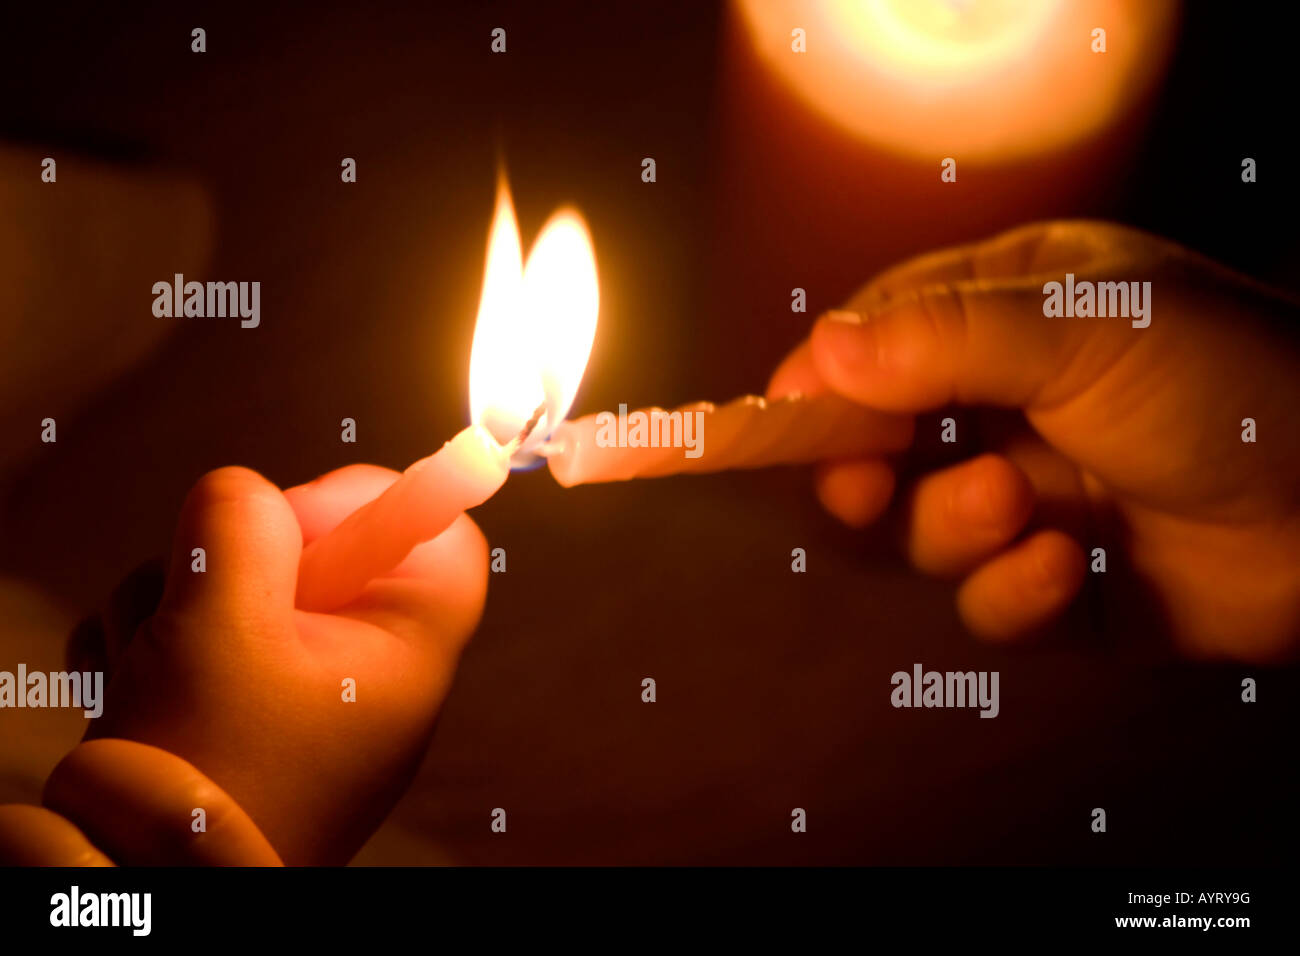 Child's hands lighting a candle Stock Photo